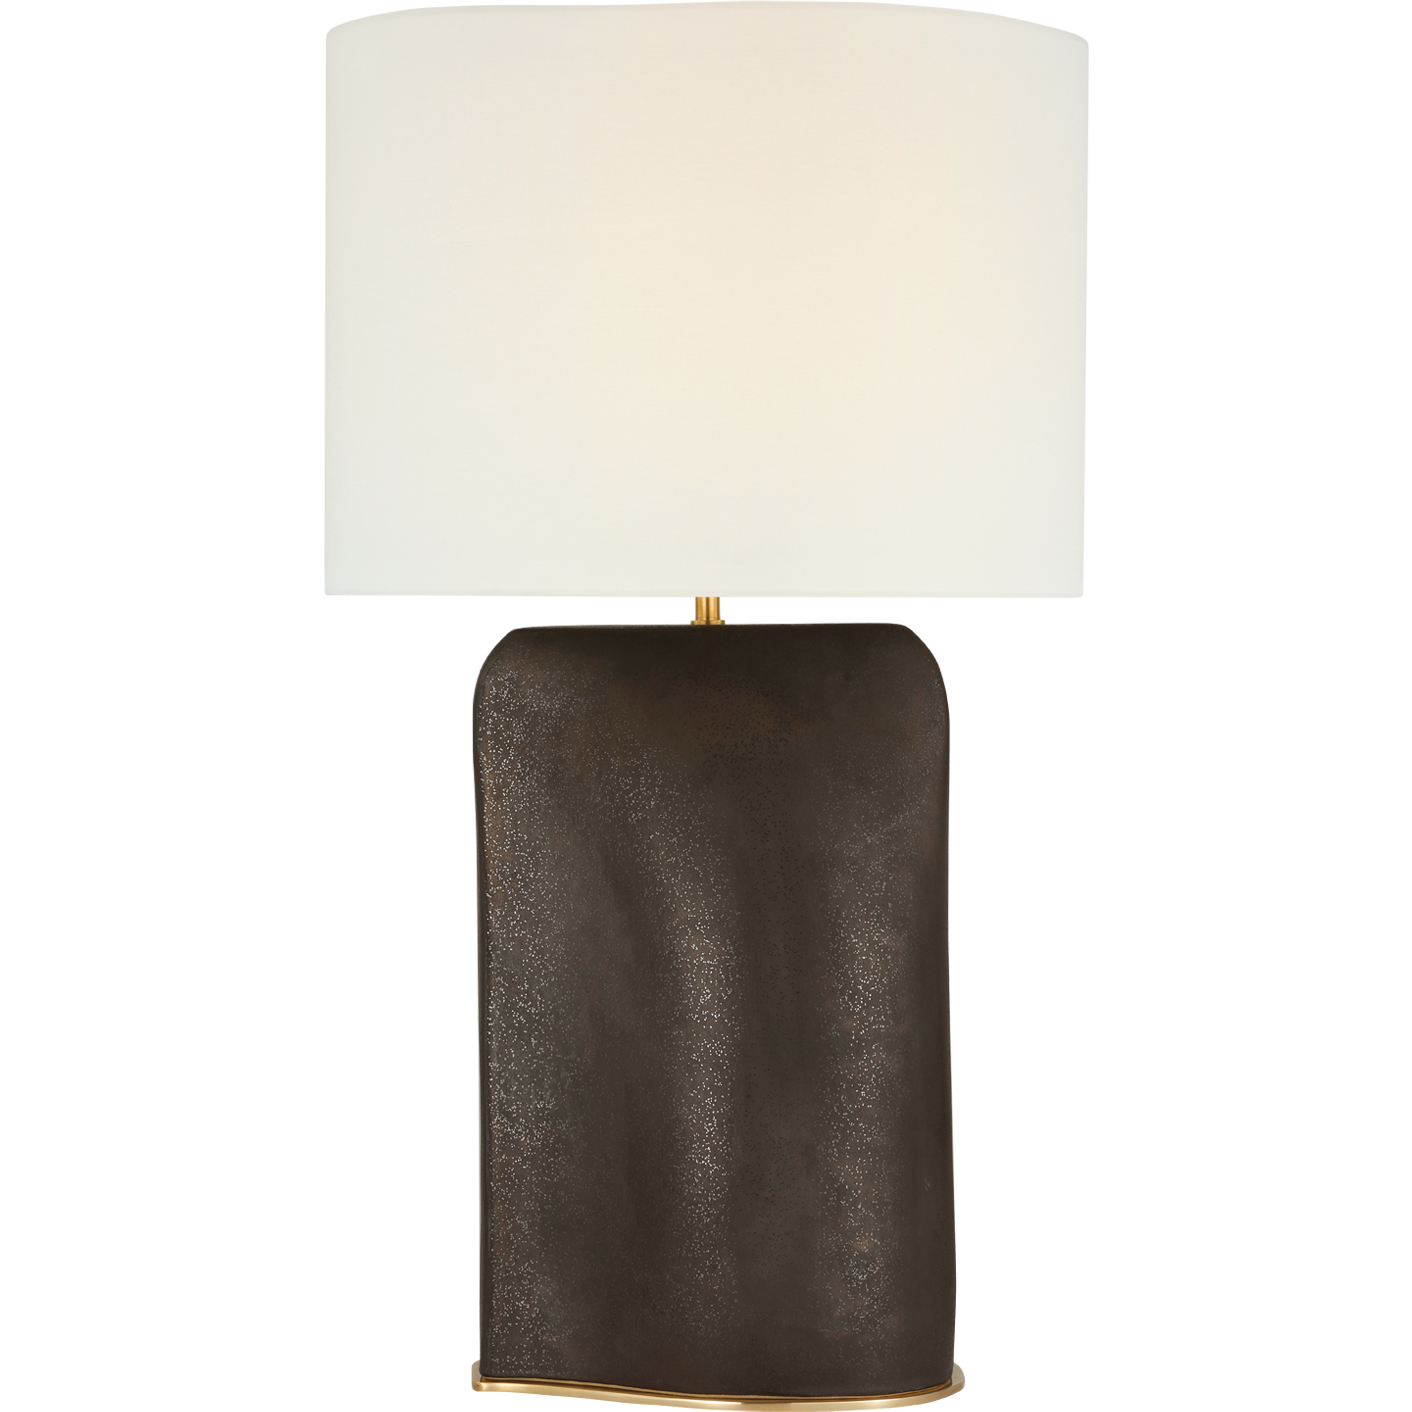 Amantani Extra Large Sculpted Form Table Lamp